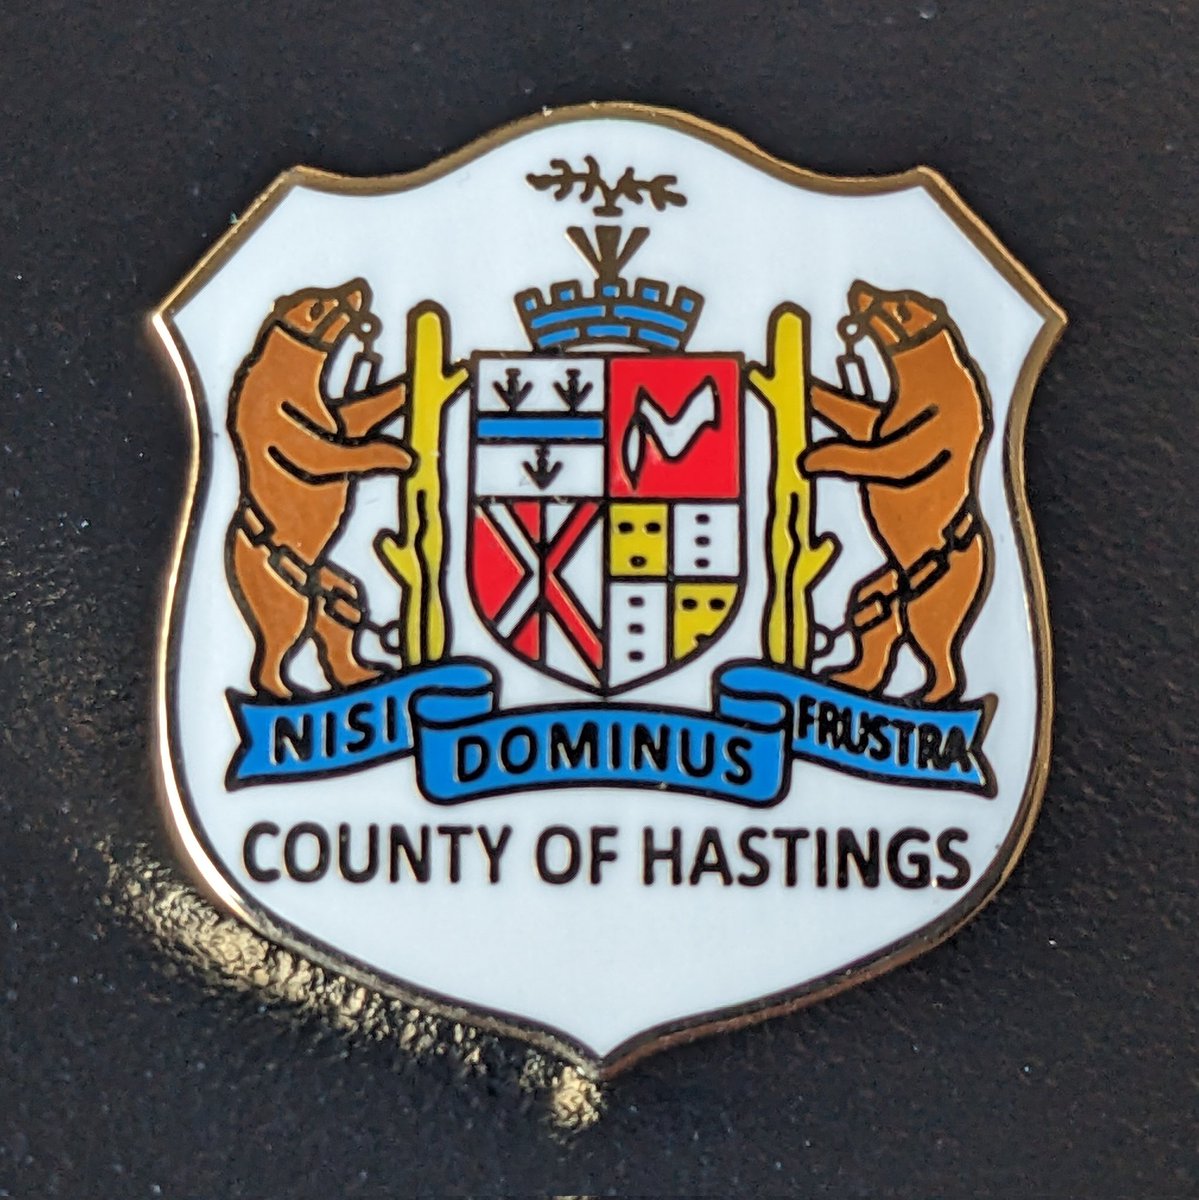 Hastings was named by Henry Fowlds who named the area around his grist it after Flora Muir Campbell British aristocrat Francis Rawdon-Hastings. 

#PinQuestON #onmuni #ontario #canada #onheritage #placenames #hastings @HastingsCounty1